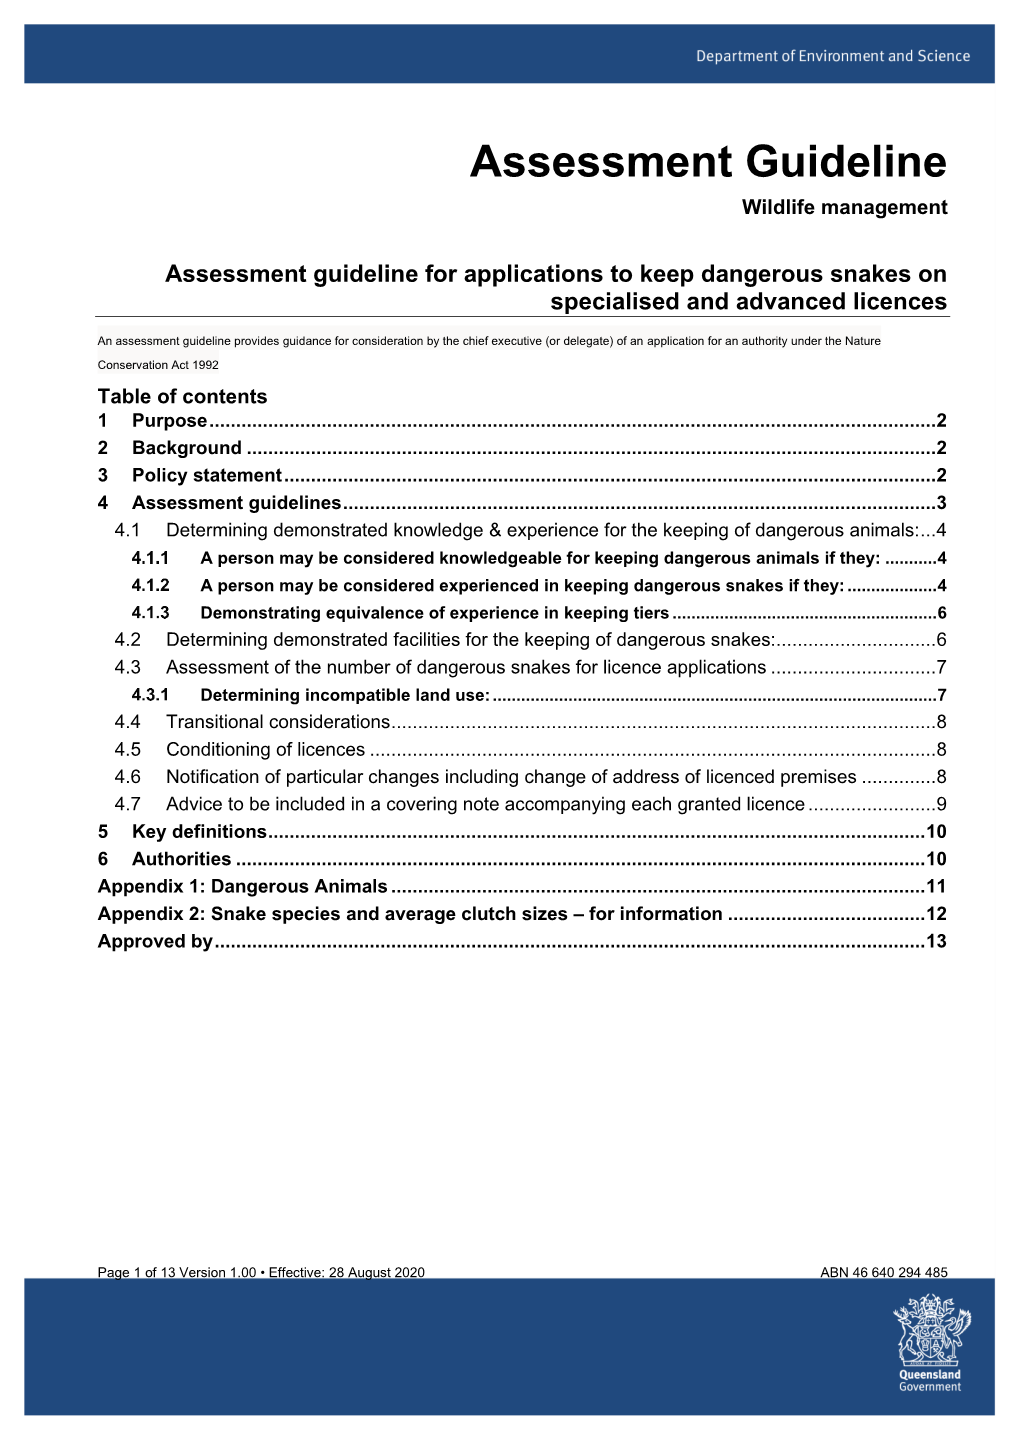 Assessment Guideline for Applications to Keep Dangerous Snakes on Specialised and Advanced Licences